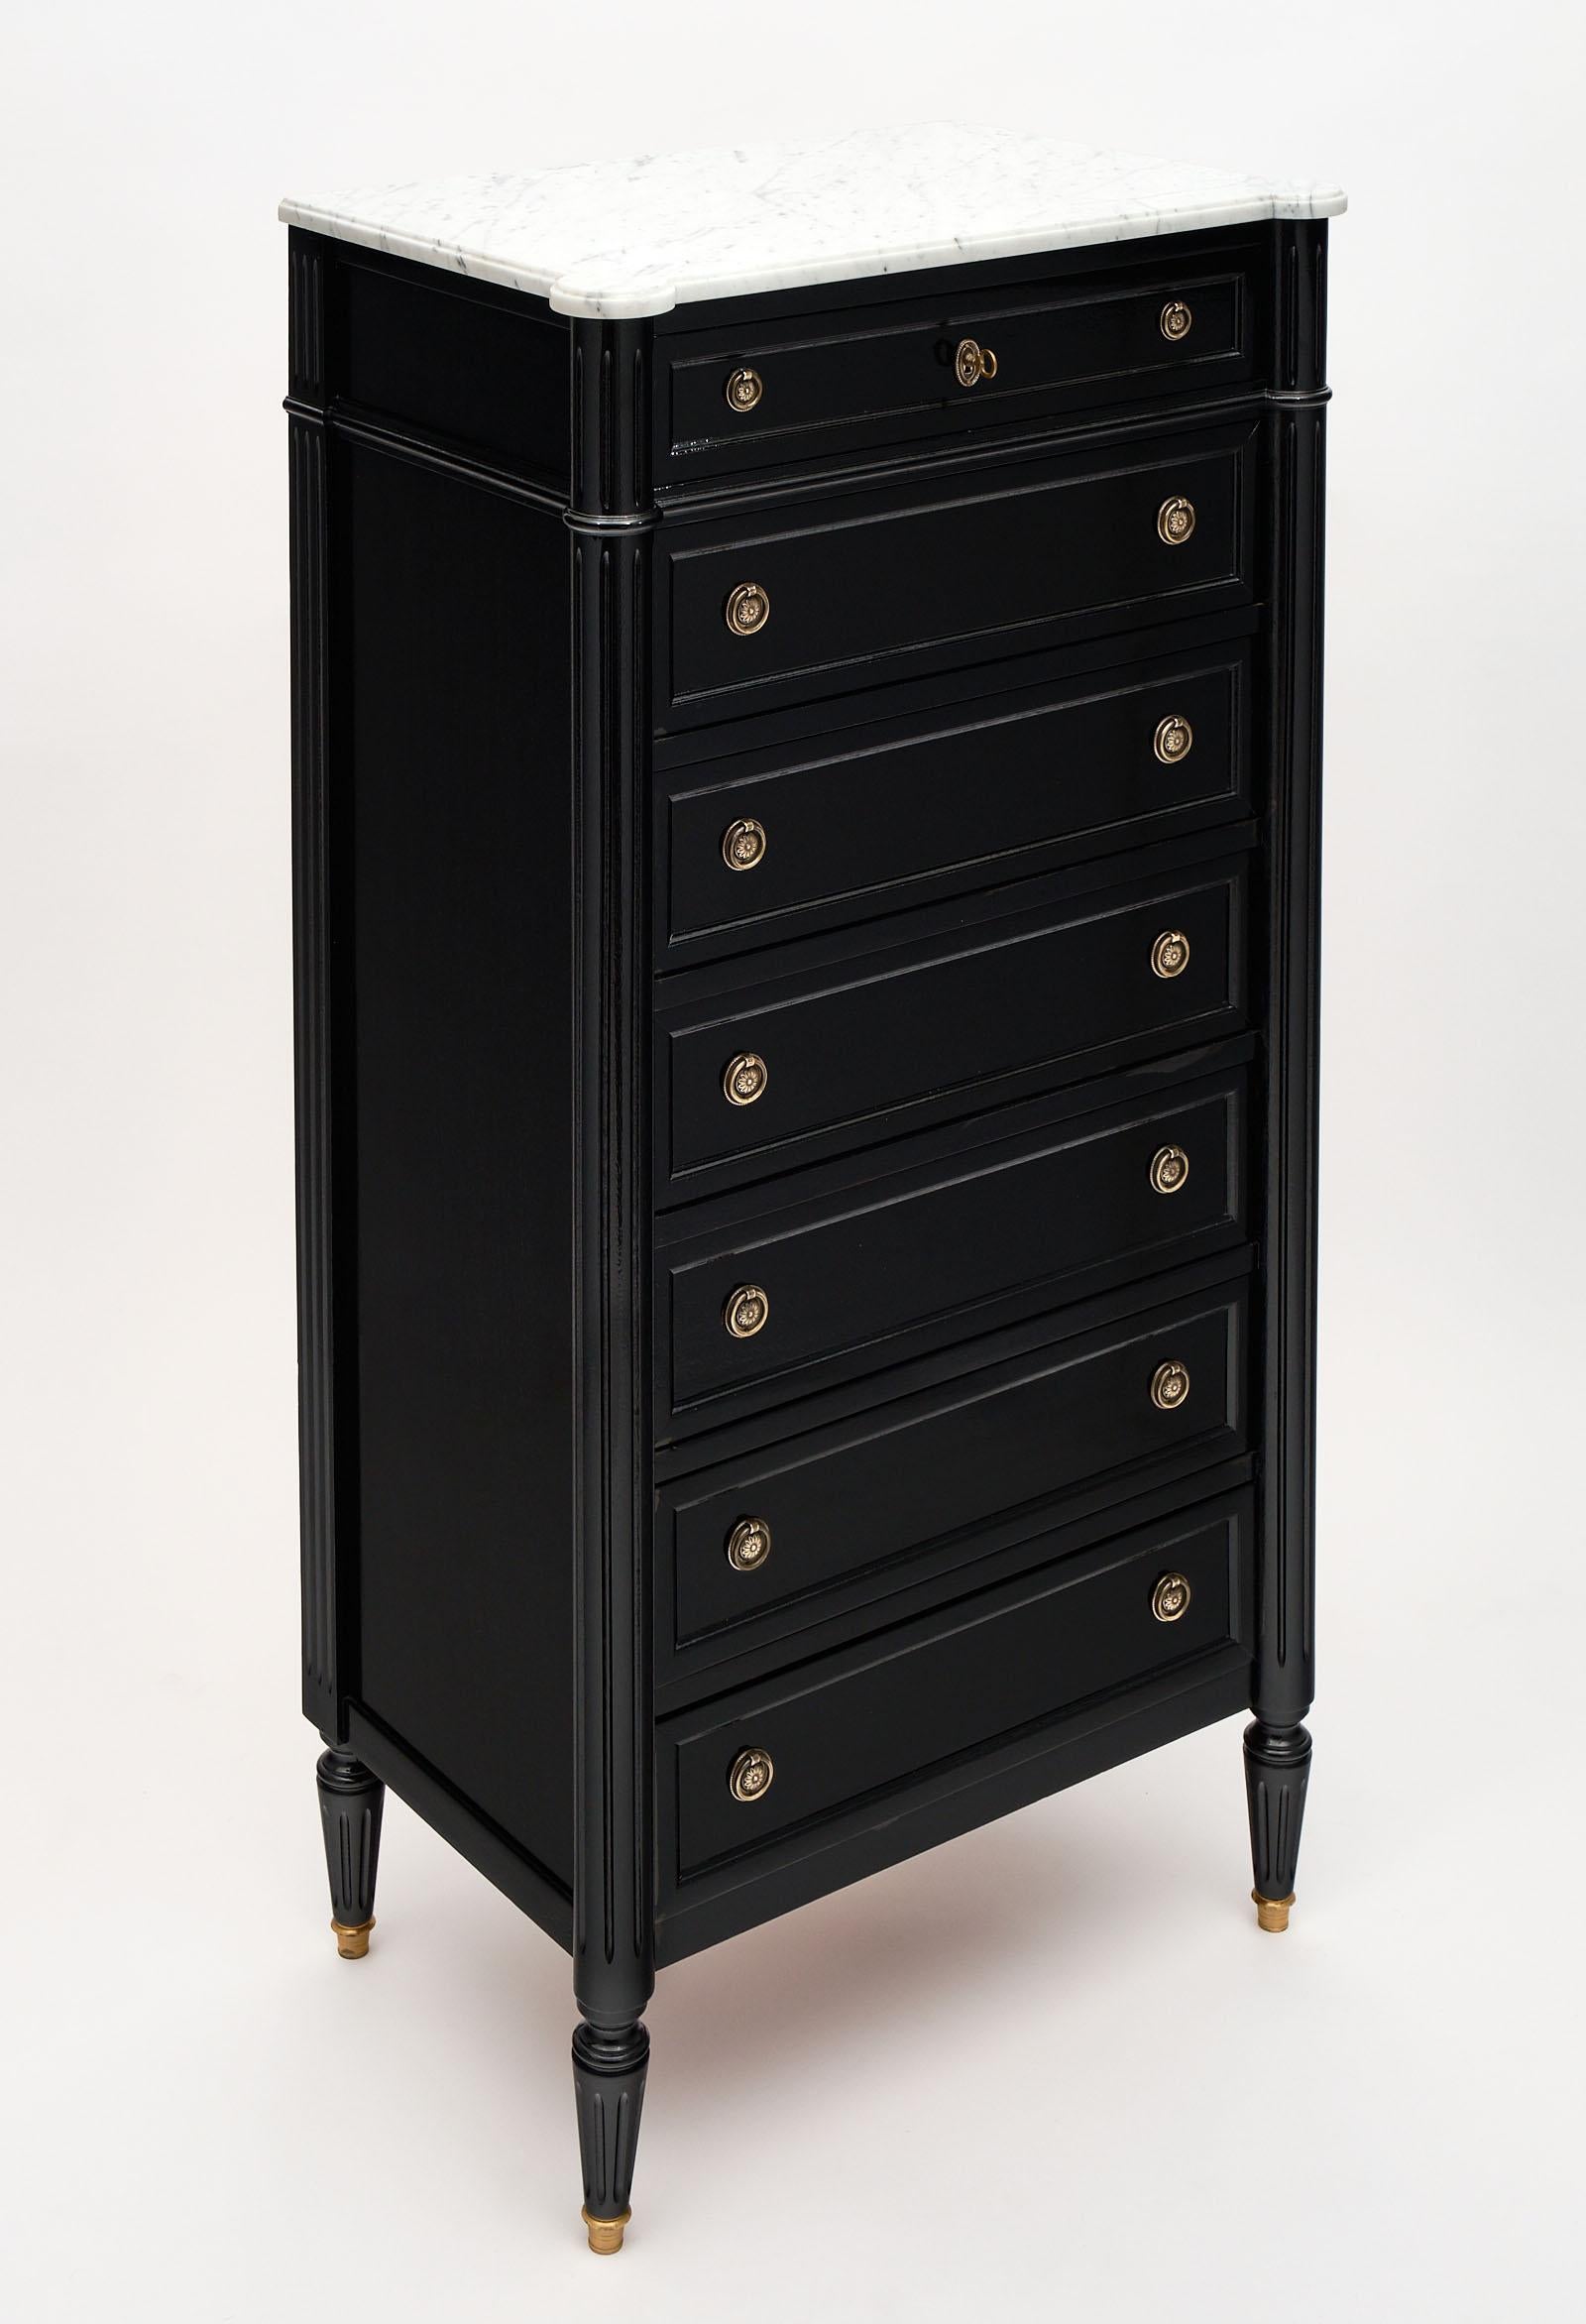 French antique Louis XVI style semainier made of mahogany and finished with an ebony French polish for a lustrous shine. This piece has seven dovetailed drawers, one for each day of the week, giving it the name semainier (semaine meaning week).